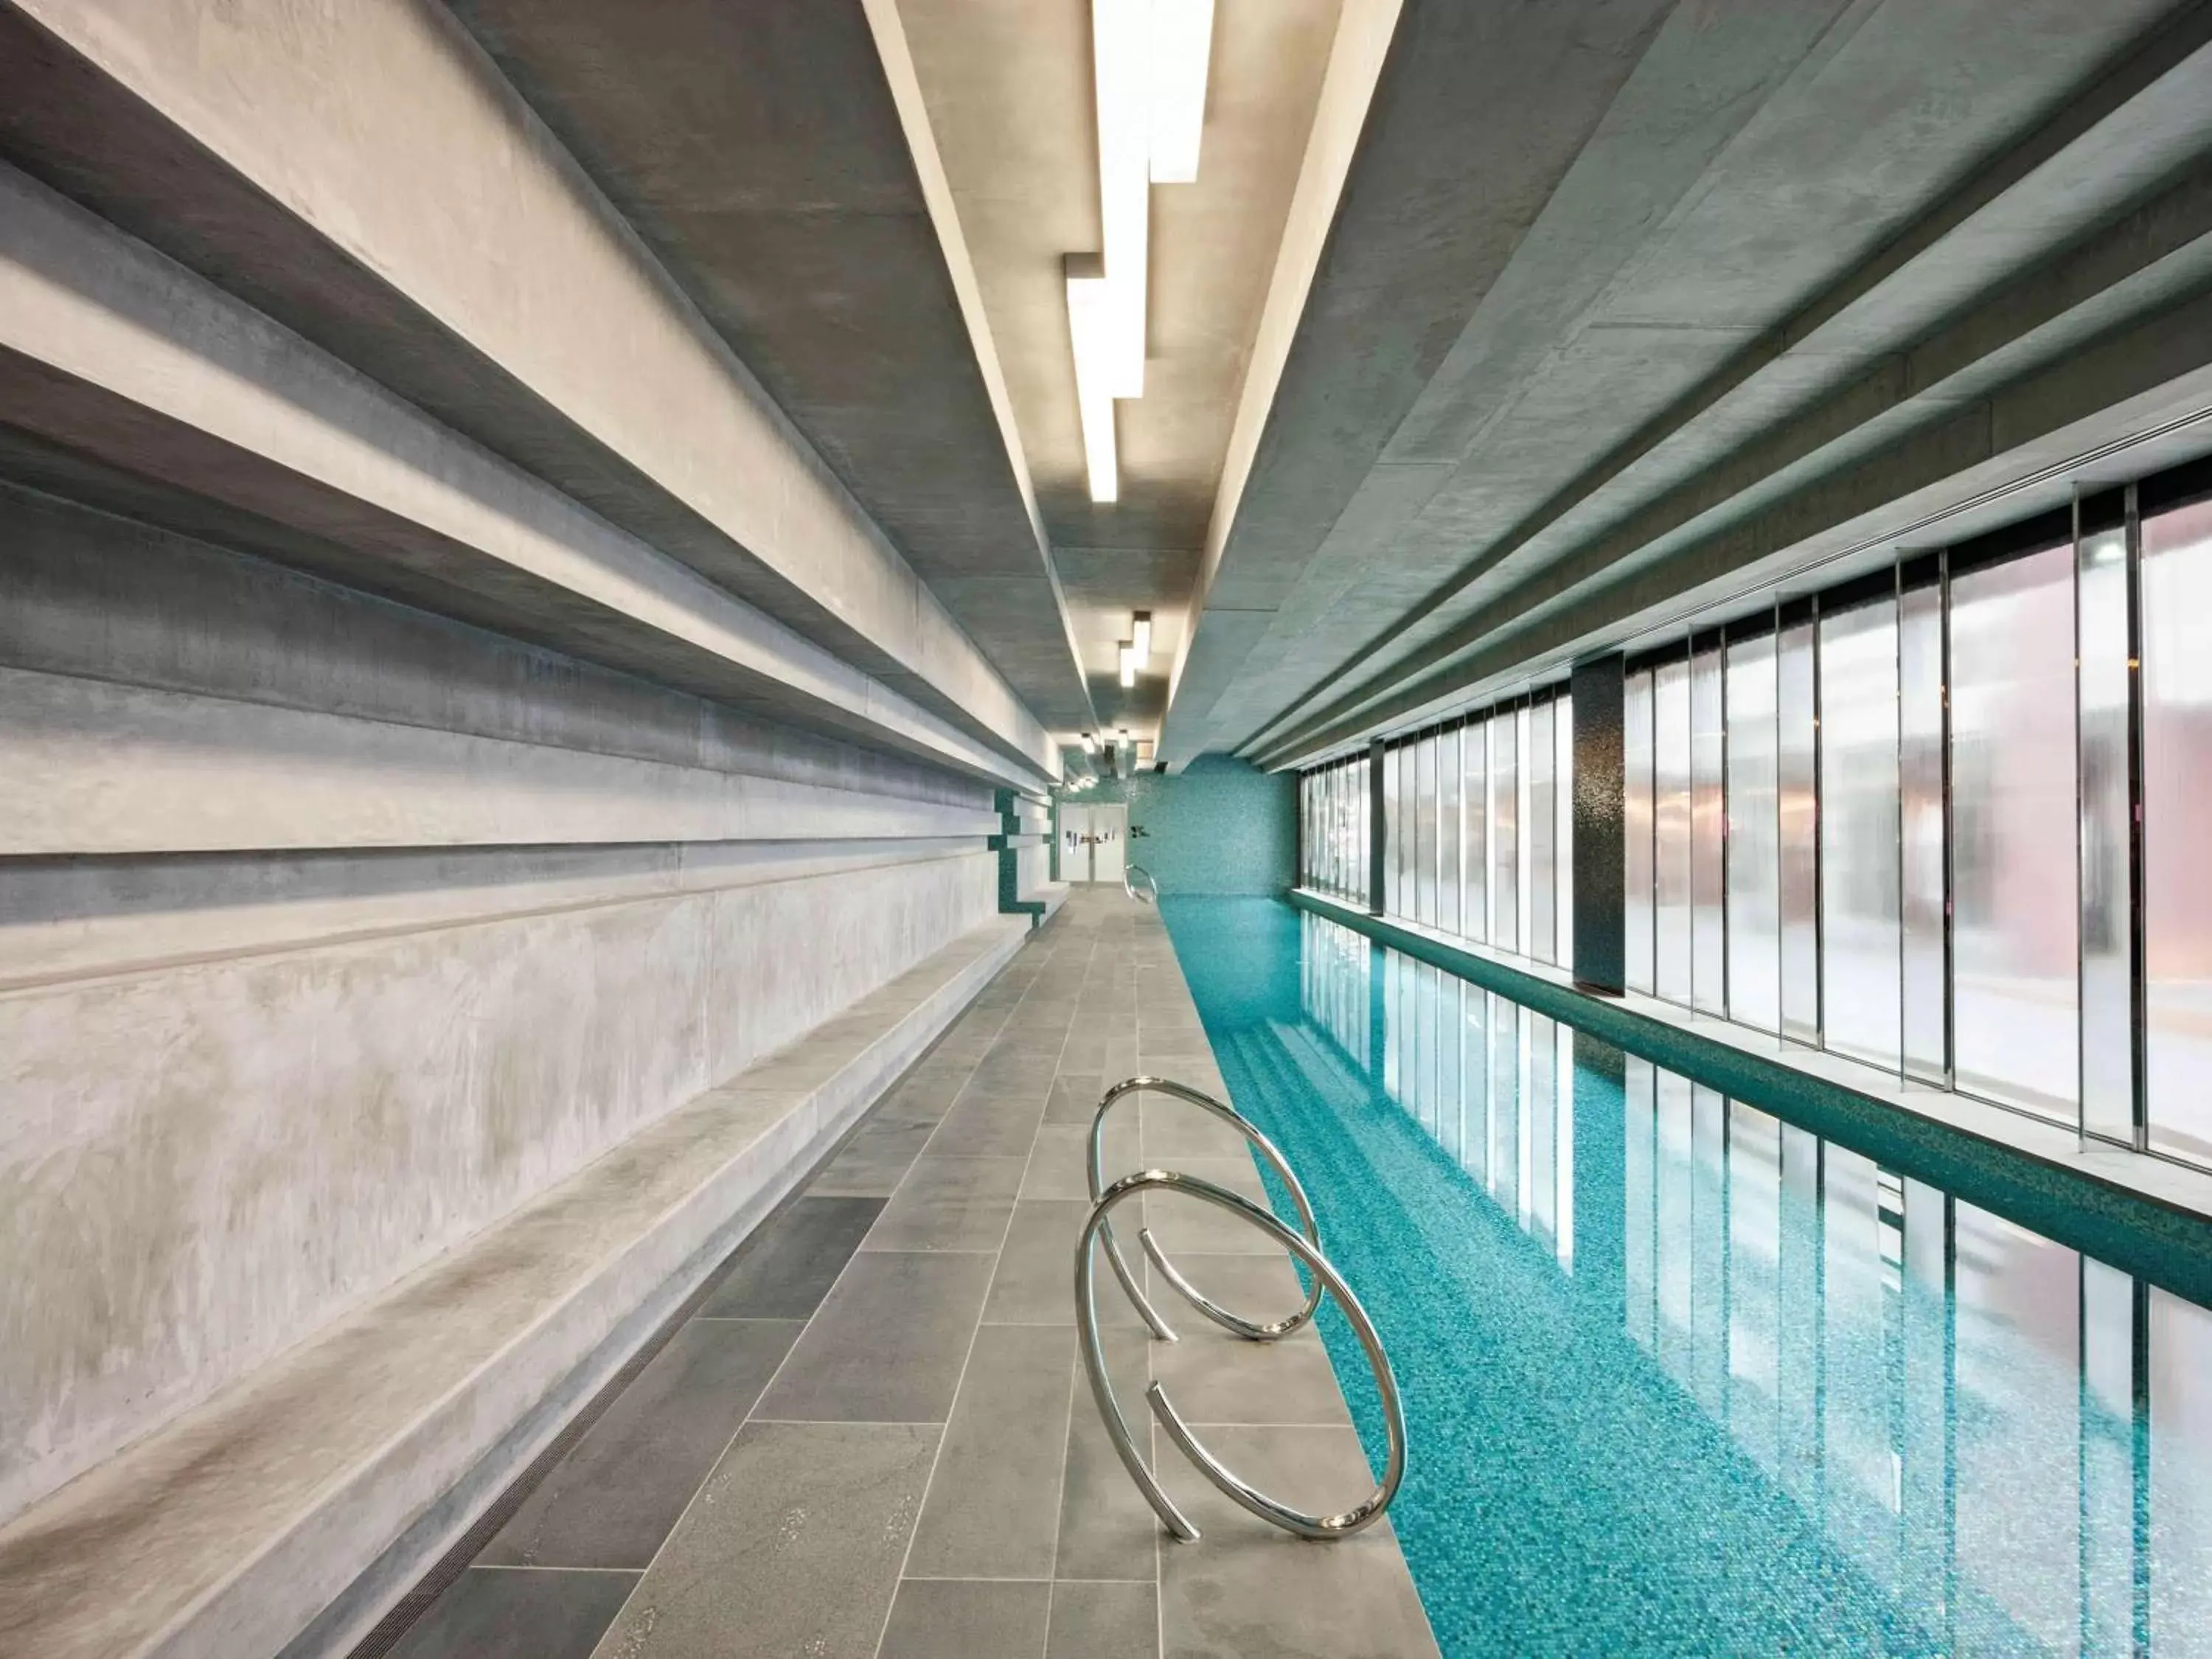 On site, Swimming Pool in The Sebel Melbourne Docklands Hotel